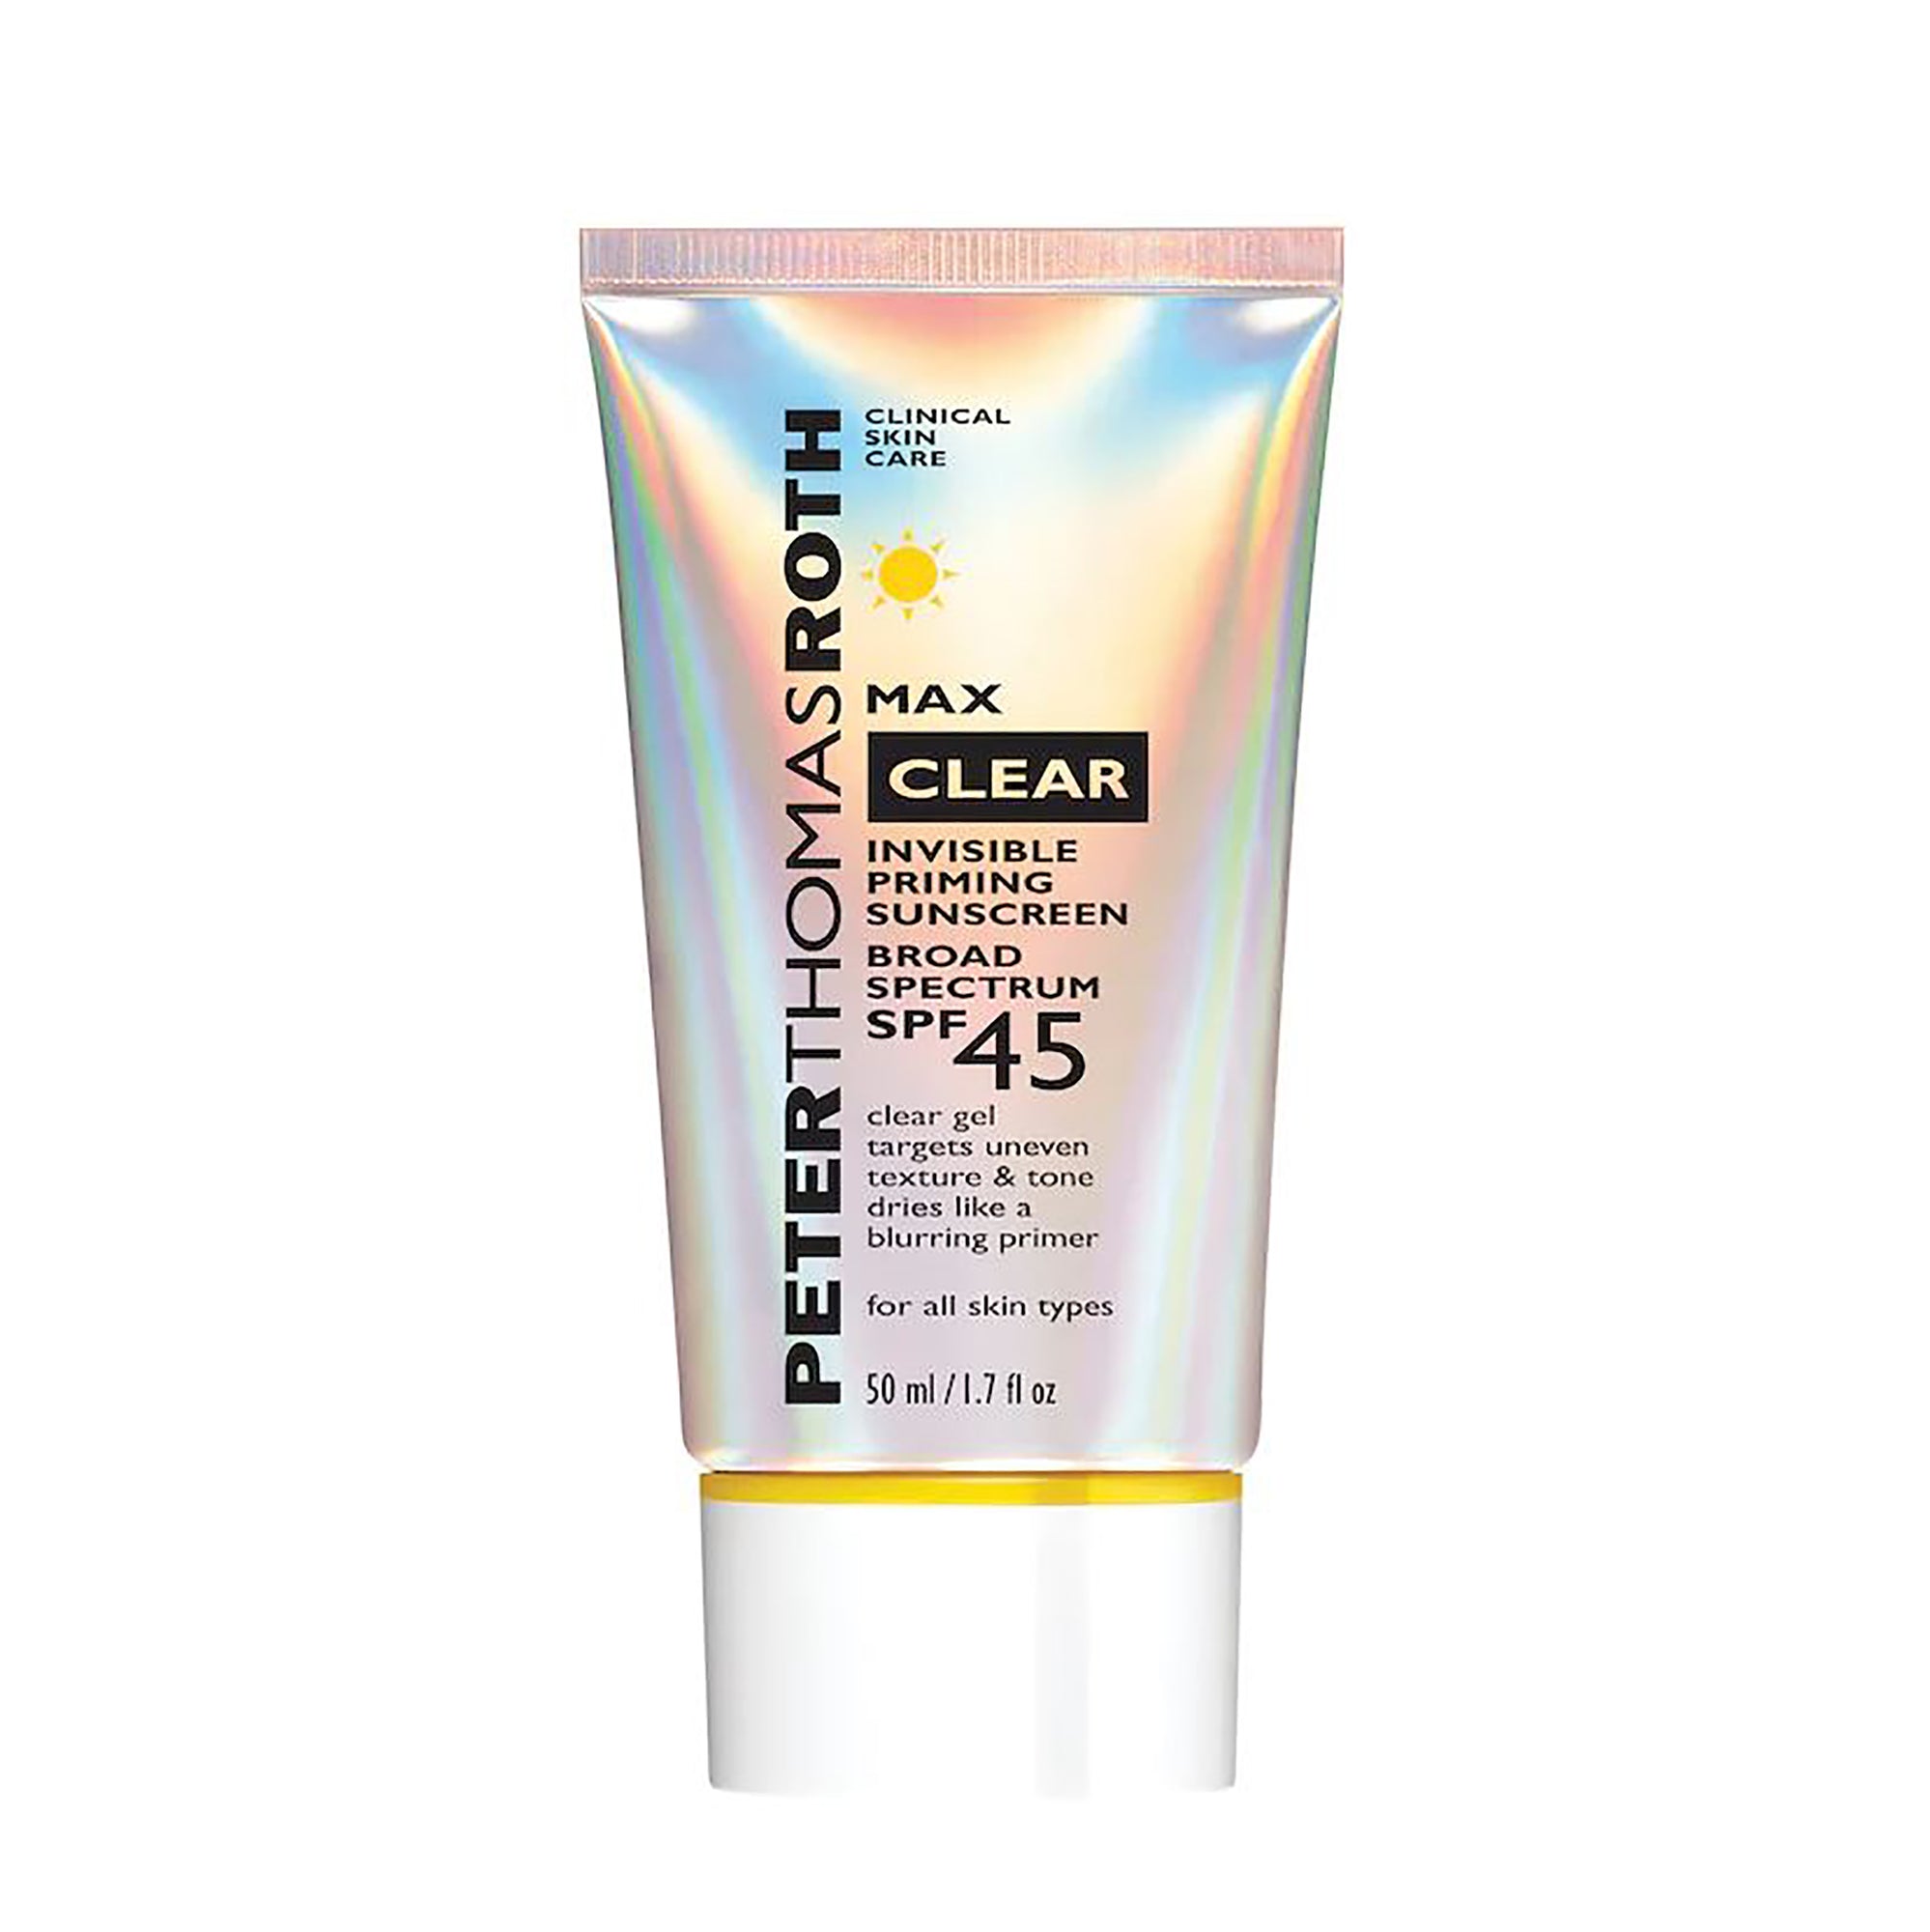 Peter Thomas Roth Max Clear Invisible Priming Sunscreen Broad Spectrum SPF 45 / 1.7